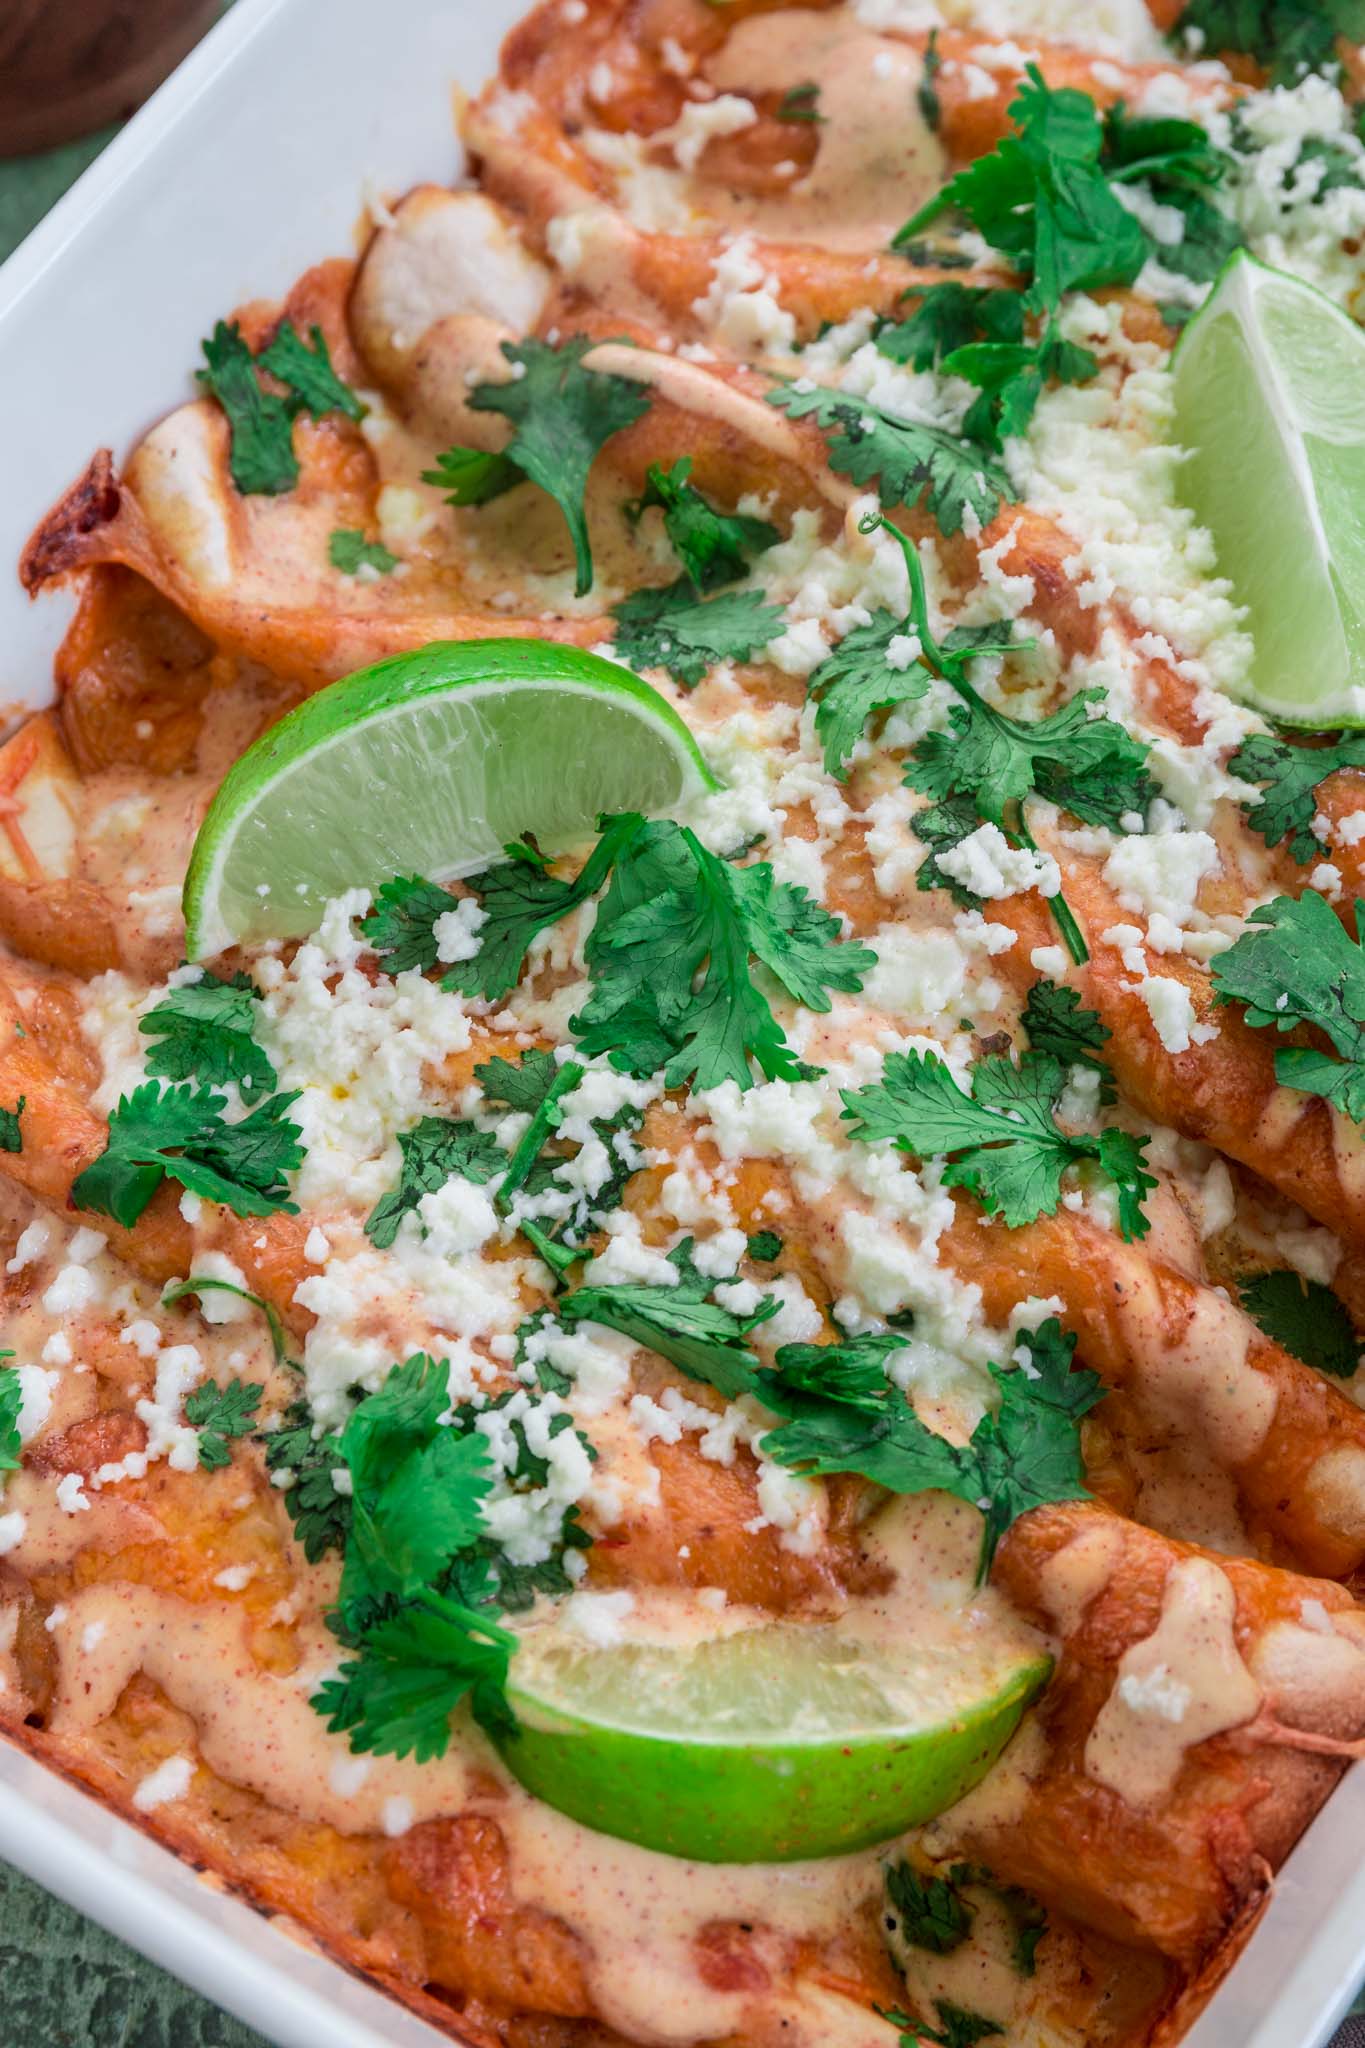 Chicken and Chorizo Enchiladas with Chipotle Crema Sauce | www.oliviascuisine.com | If you like it hot, these Chicken and Chorizo Enchiladas are for you! Spicy, delicious, and smothered with the creamiest Chipotle Crema Sauce. They will knock your socks off! (Recipe and food photography by @oliviascuisine.)